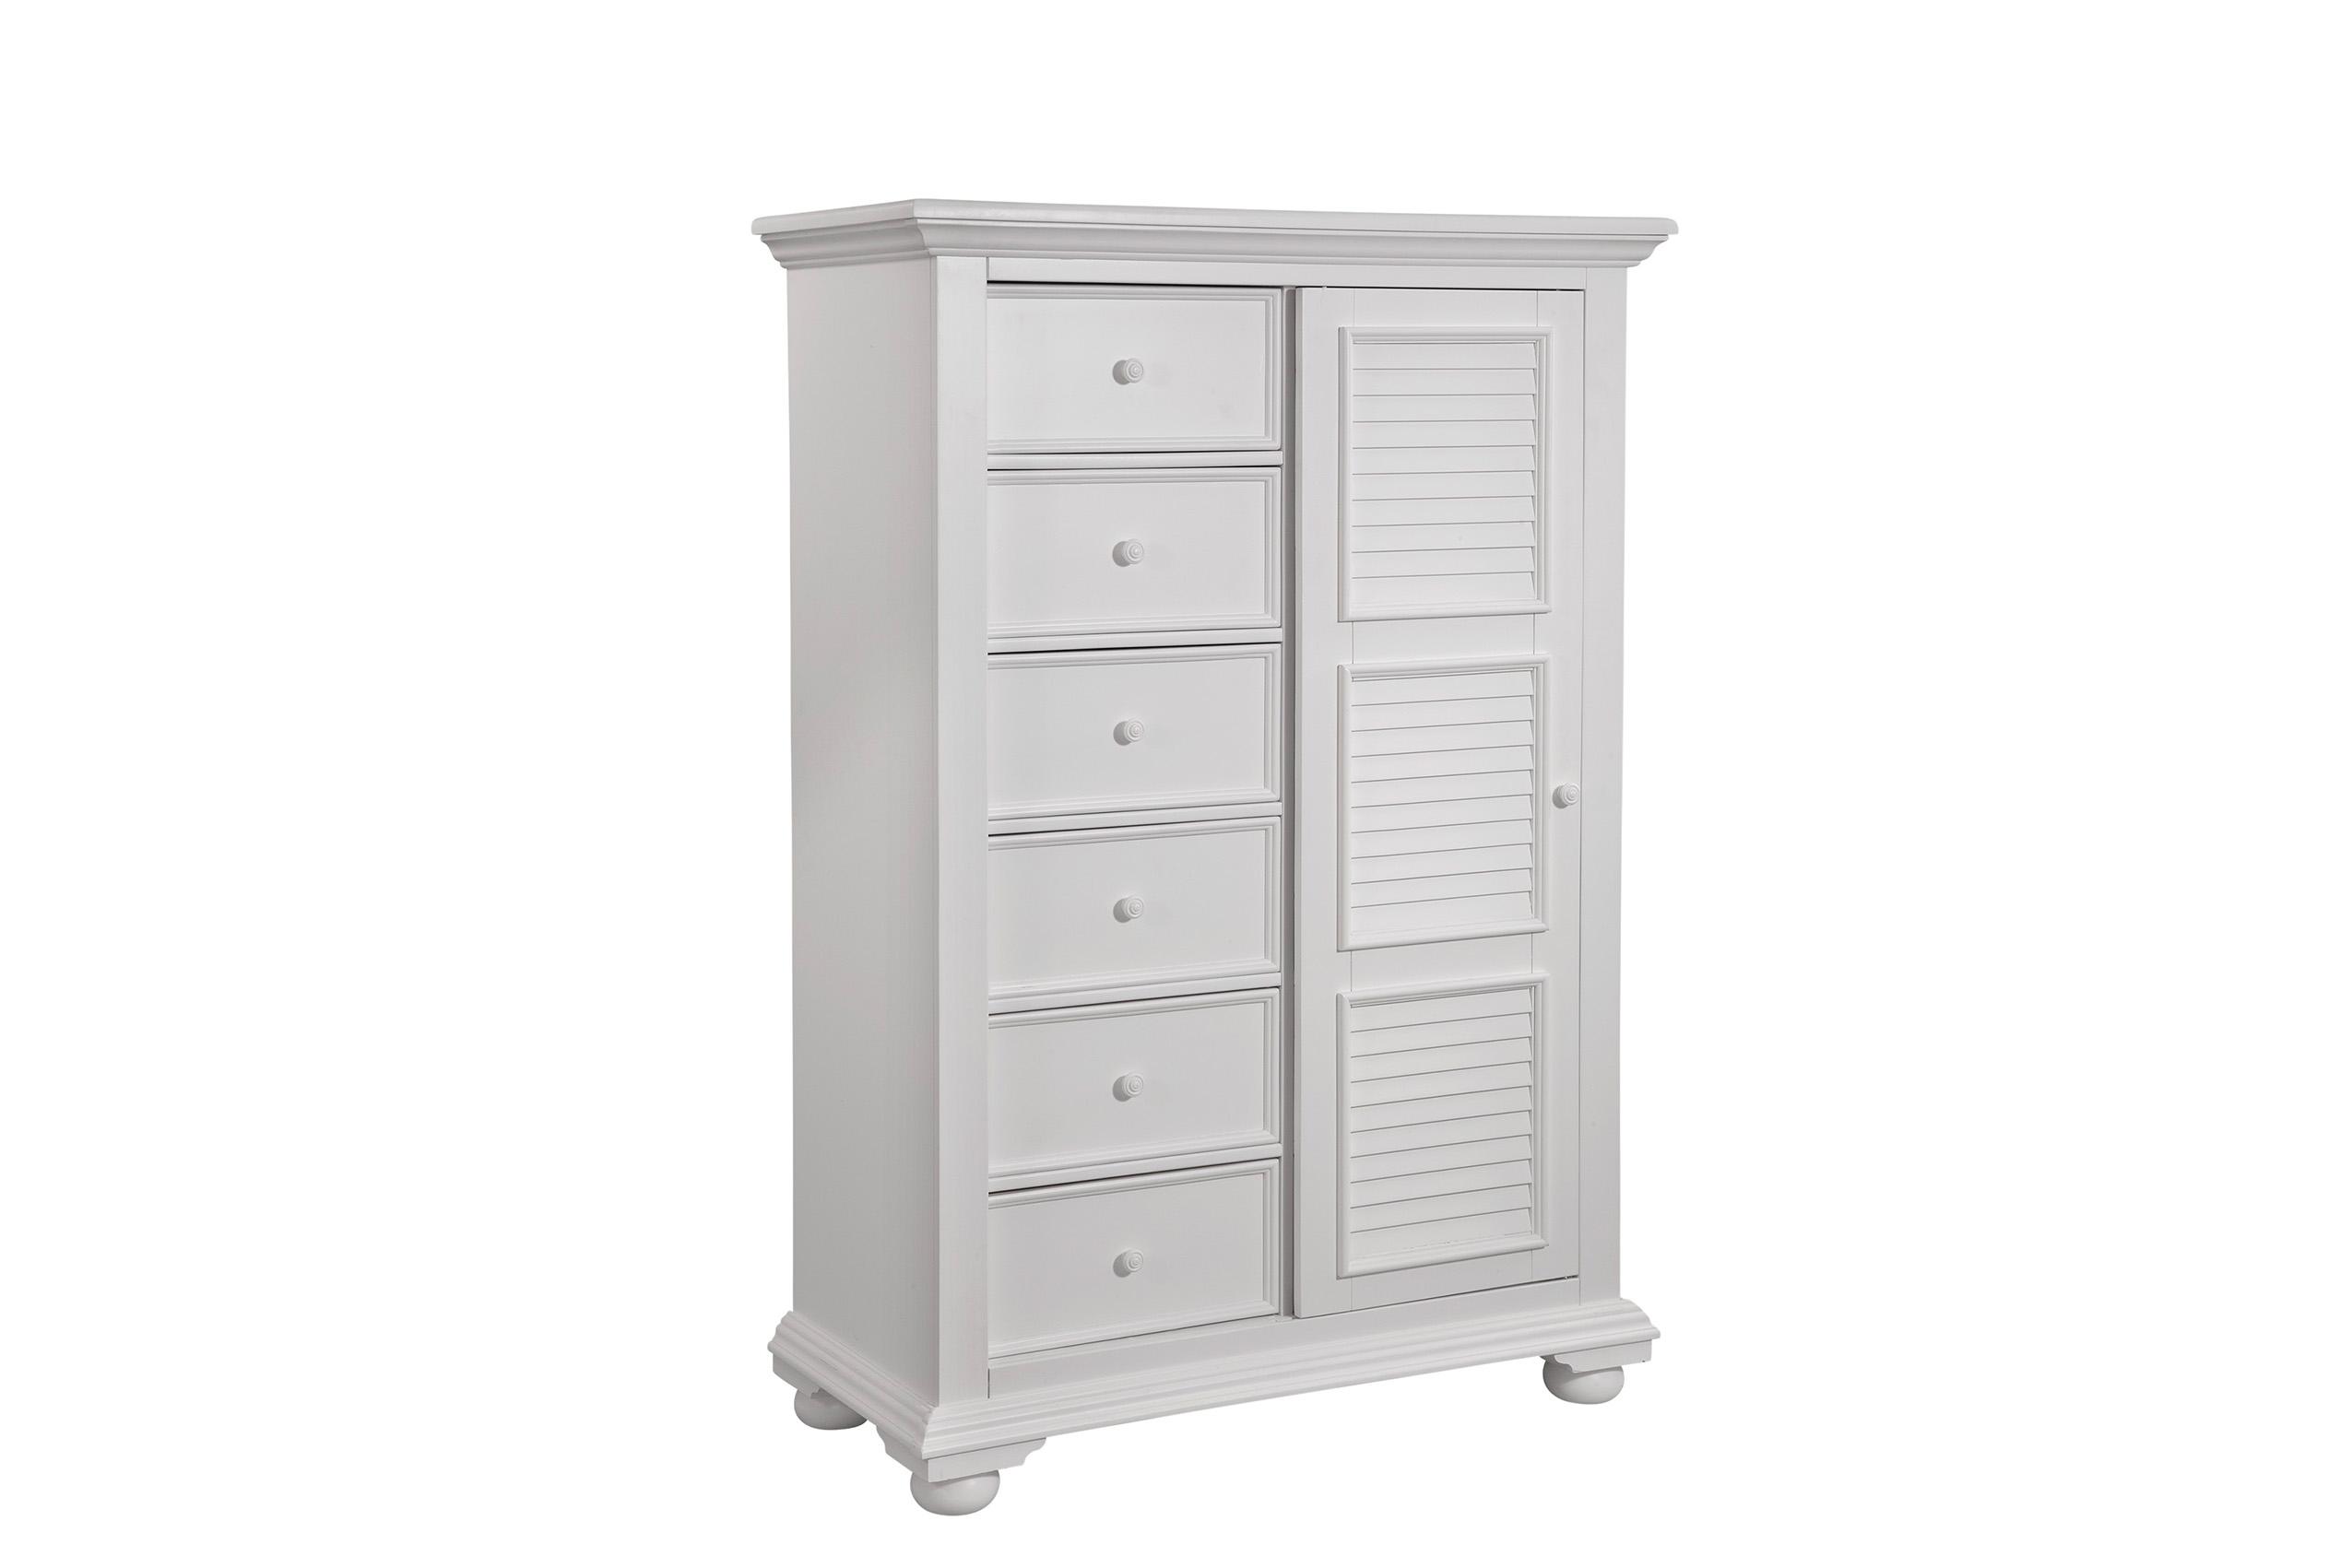 Classic, Traditional, Cottage Chest COTTAGE 6510-181 6510-181 in White 